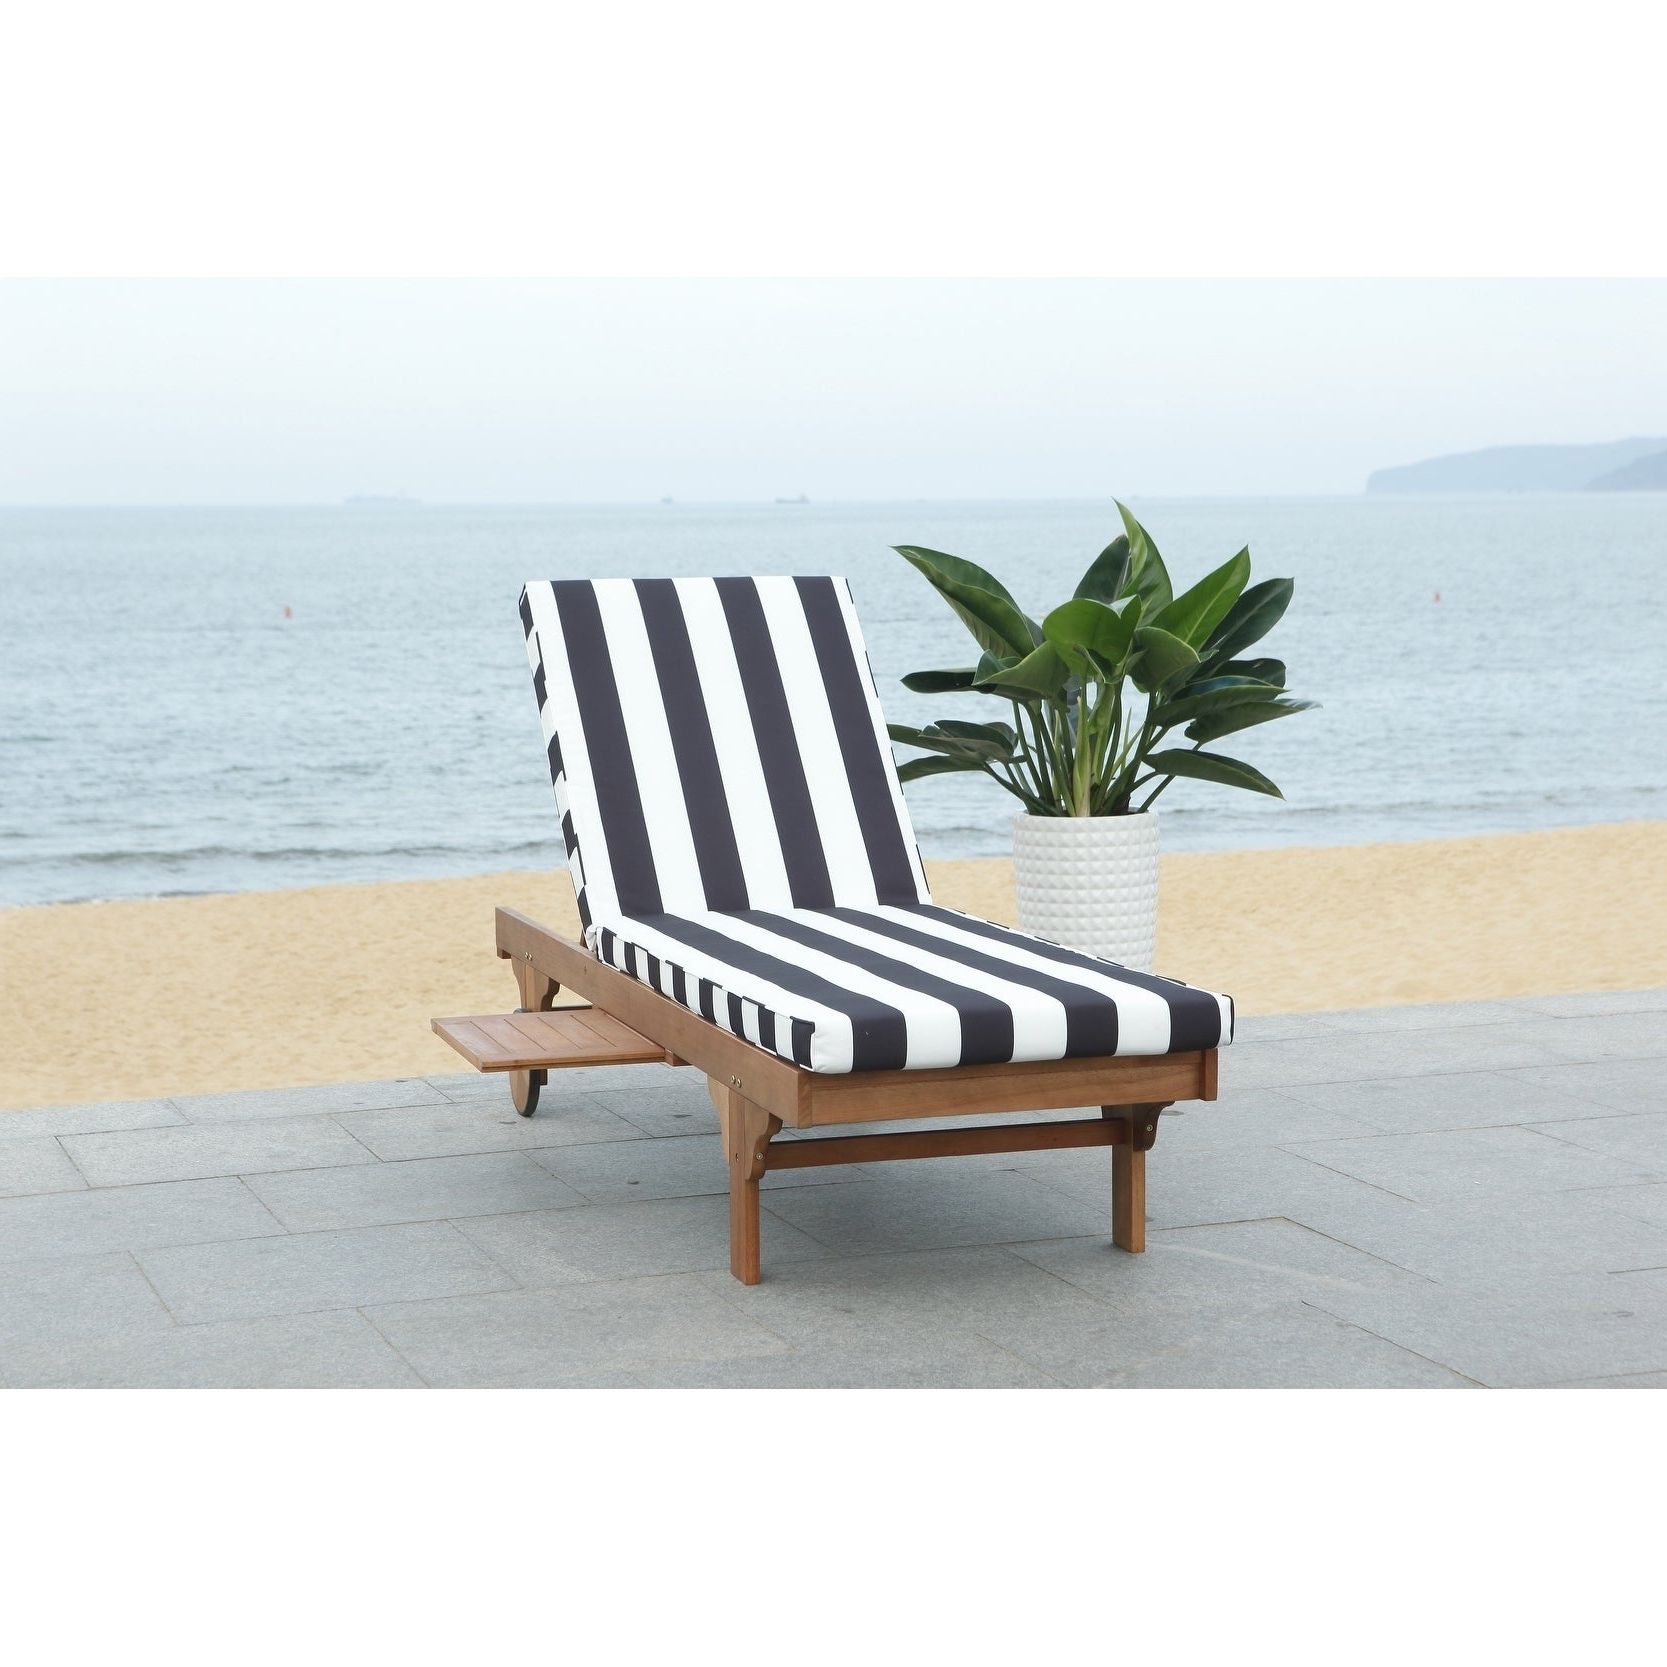 Safavieh Outdoor Living Newport Ash Black/ White Stripe Cart Wheel  Adjustable Chaise Lounge Chair – 27.6" X 78.7" X  (View 2 of 25)